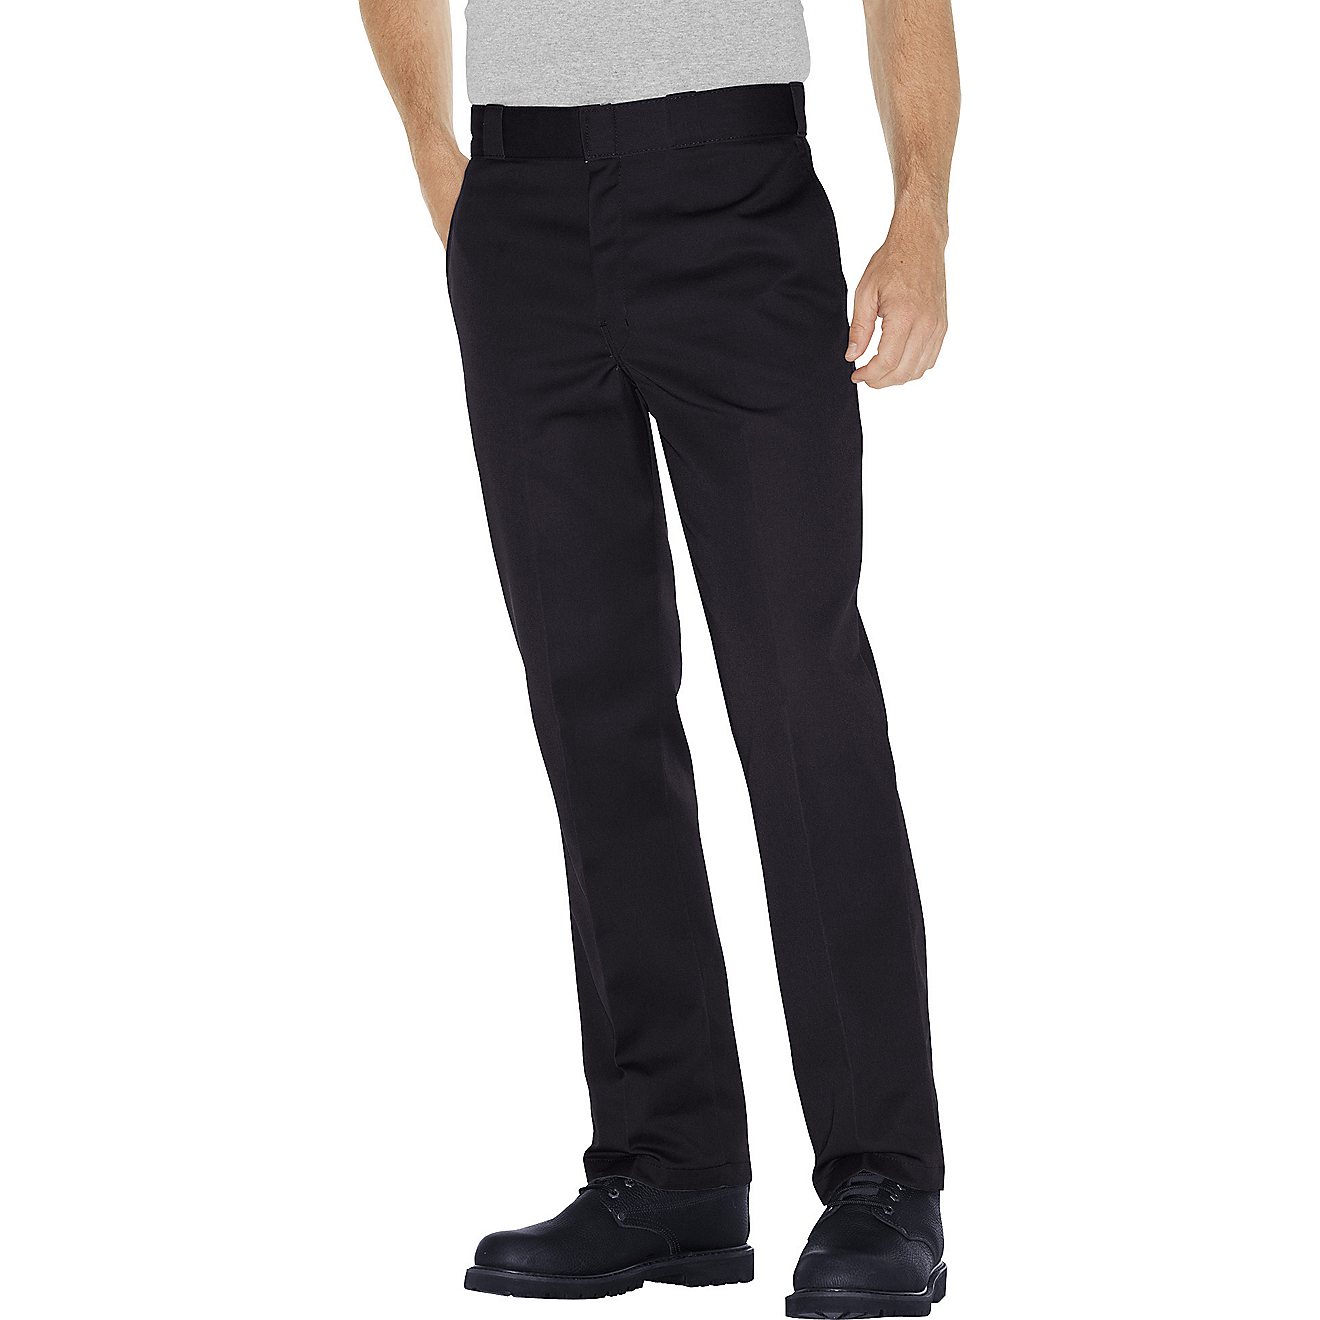 Dickies Men's 874 Flex Work Pant | Free Shipping at Academy